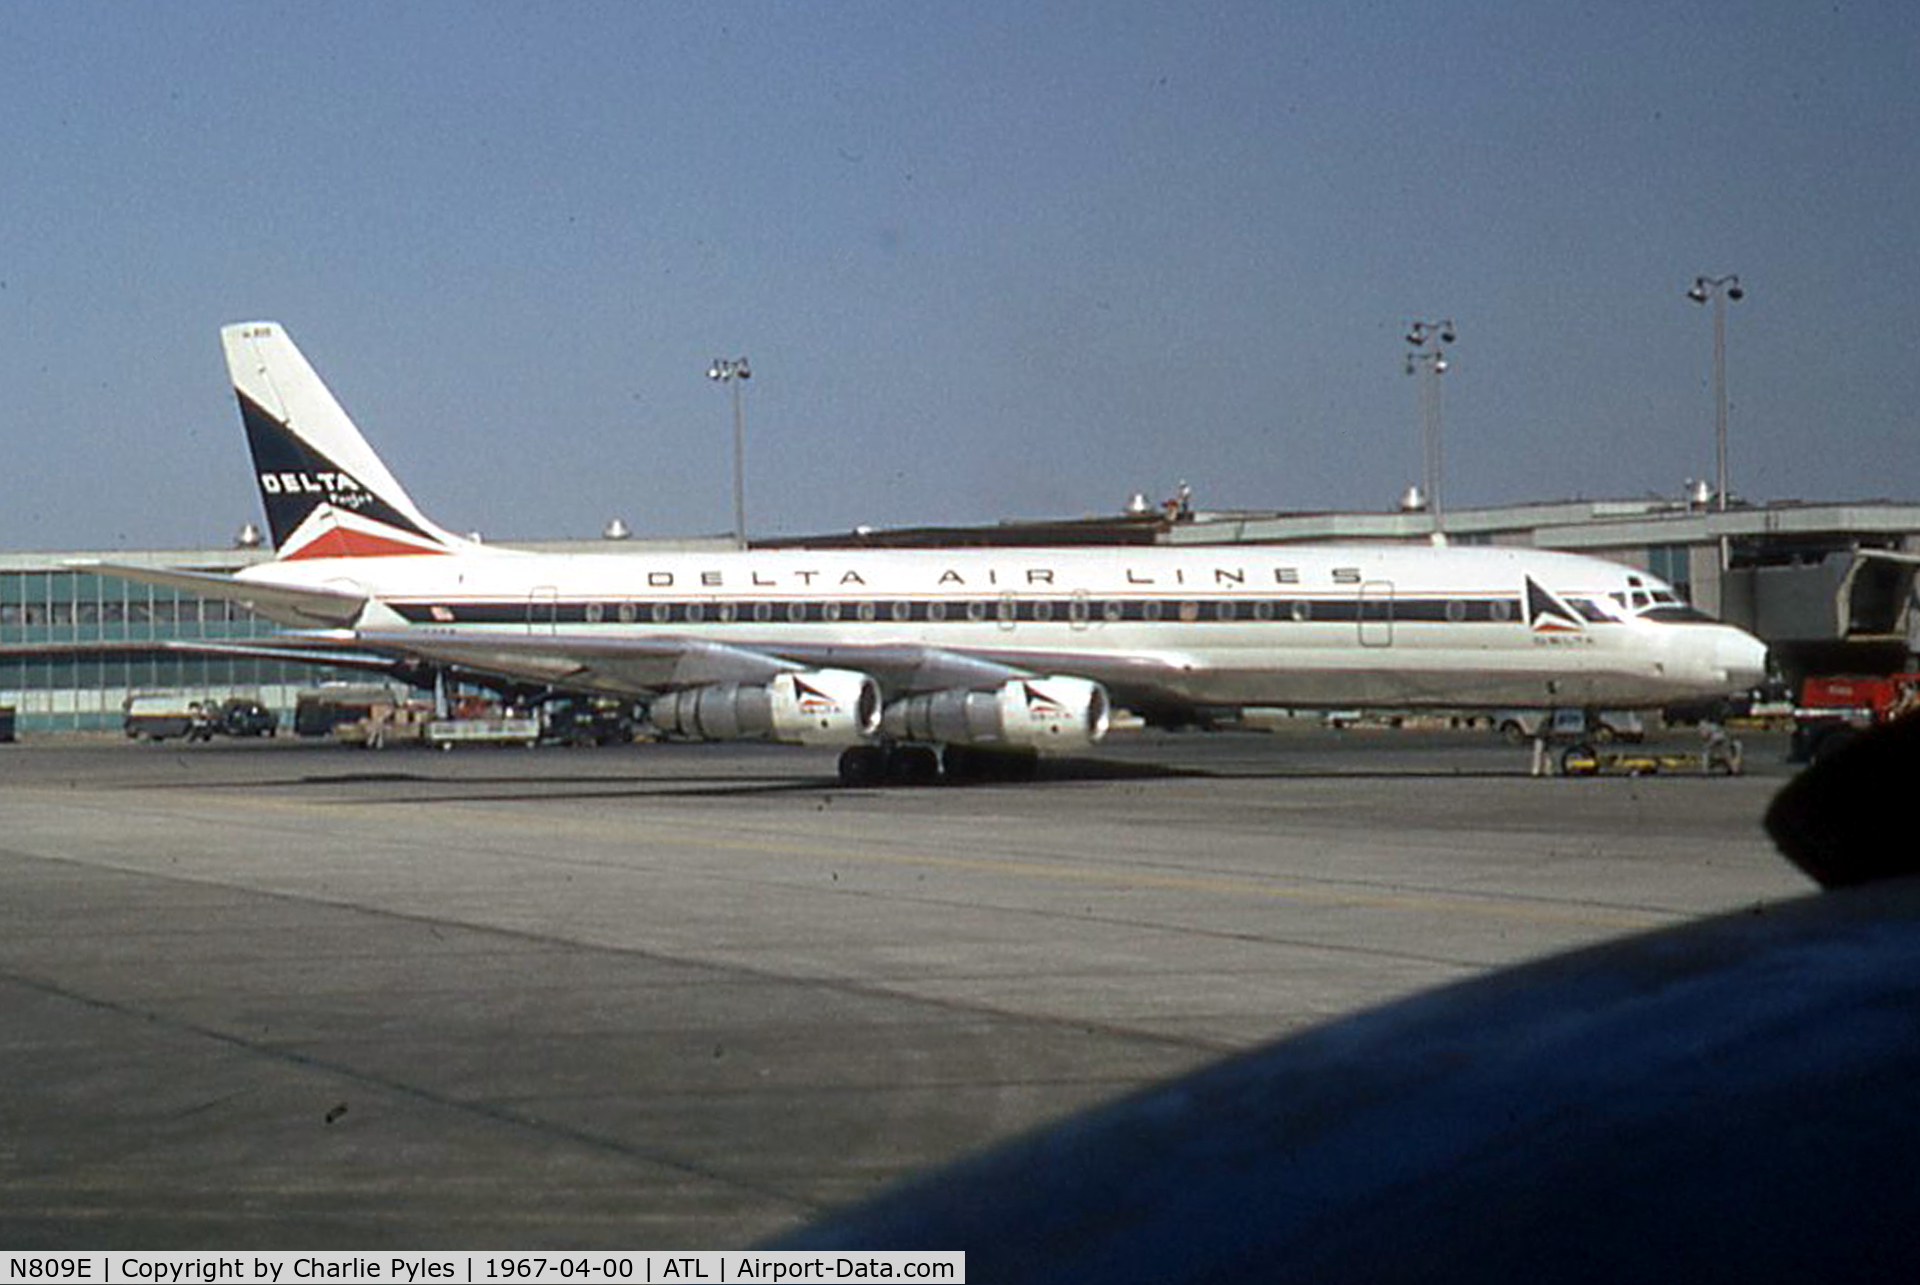 N809E, 1962 Douglas DC-8-51 C/N 45649, After Delta parked at Marana then it went to Maldives 8Q-PNB and back to States as N805CK of Kalitta before it was broken up.